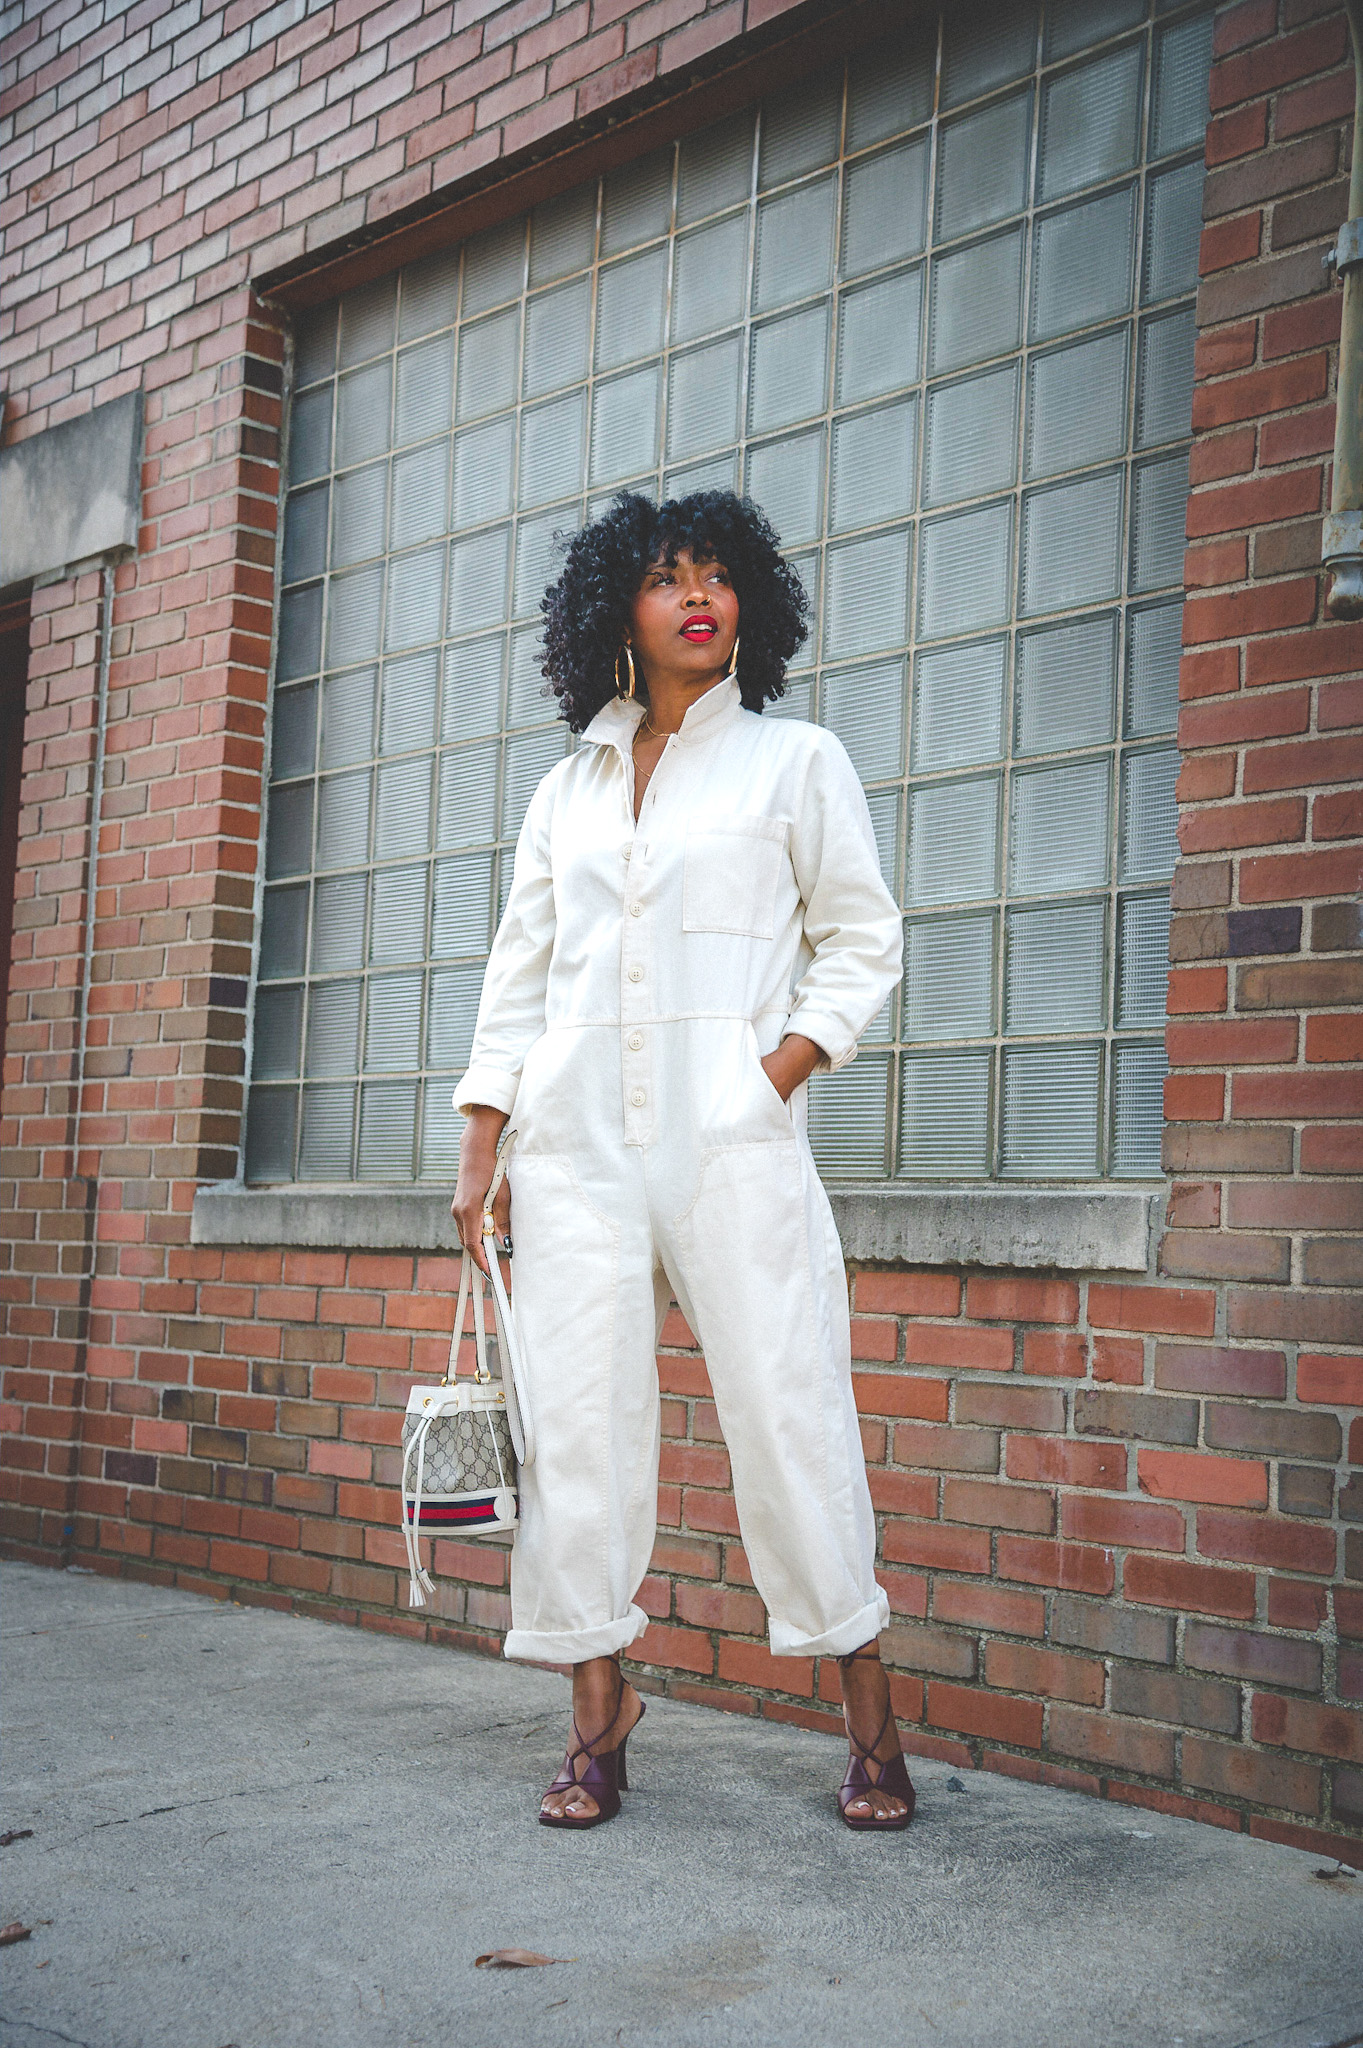 SWEENEE STYLE, HOW TO DRESS FOR HOLIDAY 2022, HOLIDAY 2022 OUTFIT IDEA, FALL 2022 OUTFIT IDEAS, INDIANAPOLIS FASHION BLOG, INDIANA STYLE BLOG, BLACK GIRLS WHO BLOG